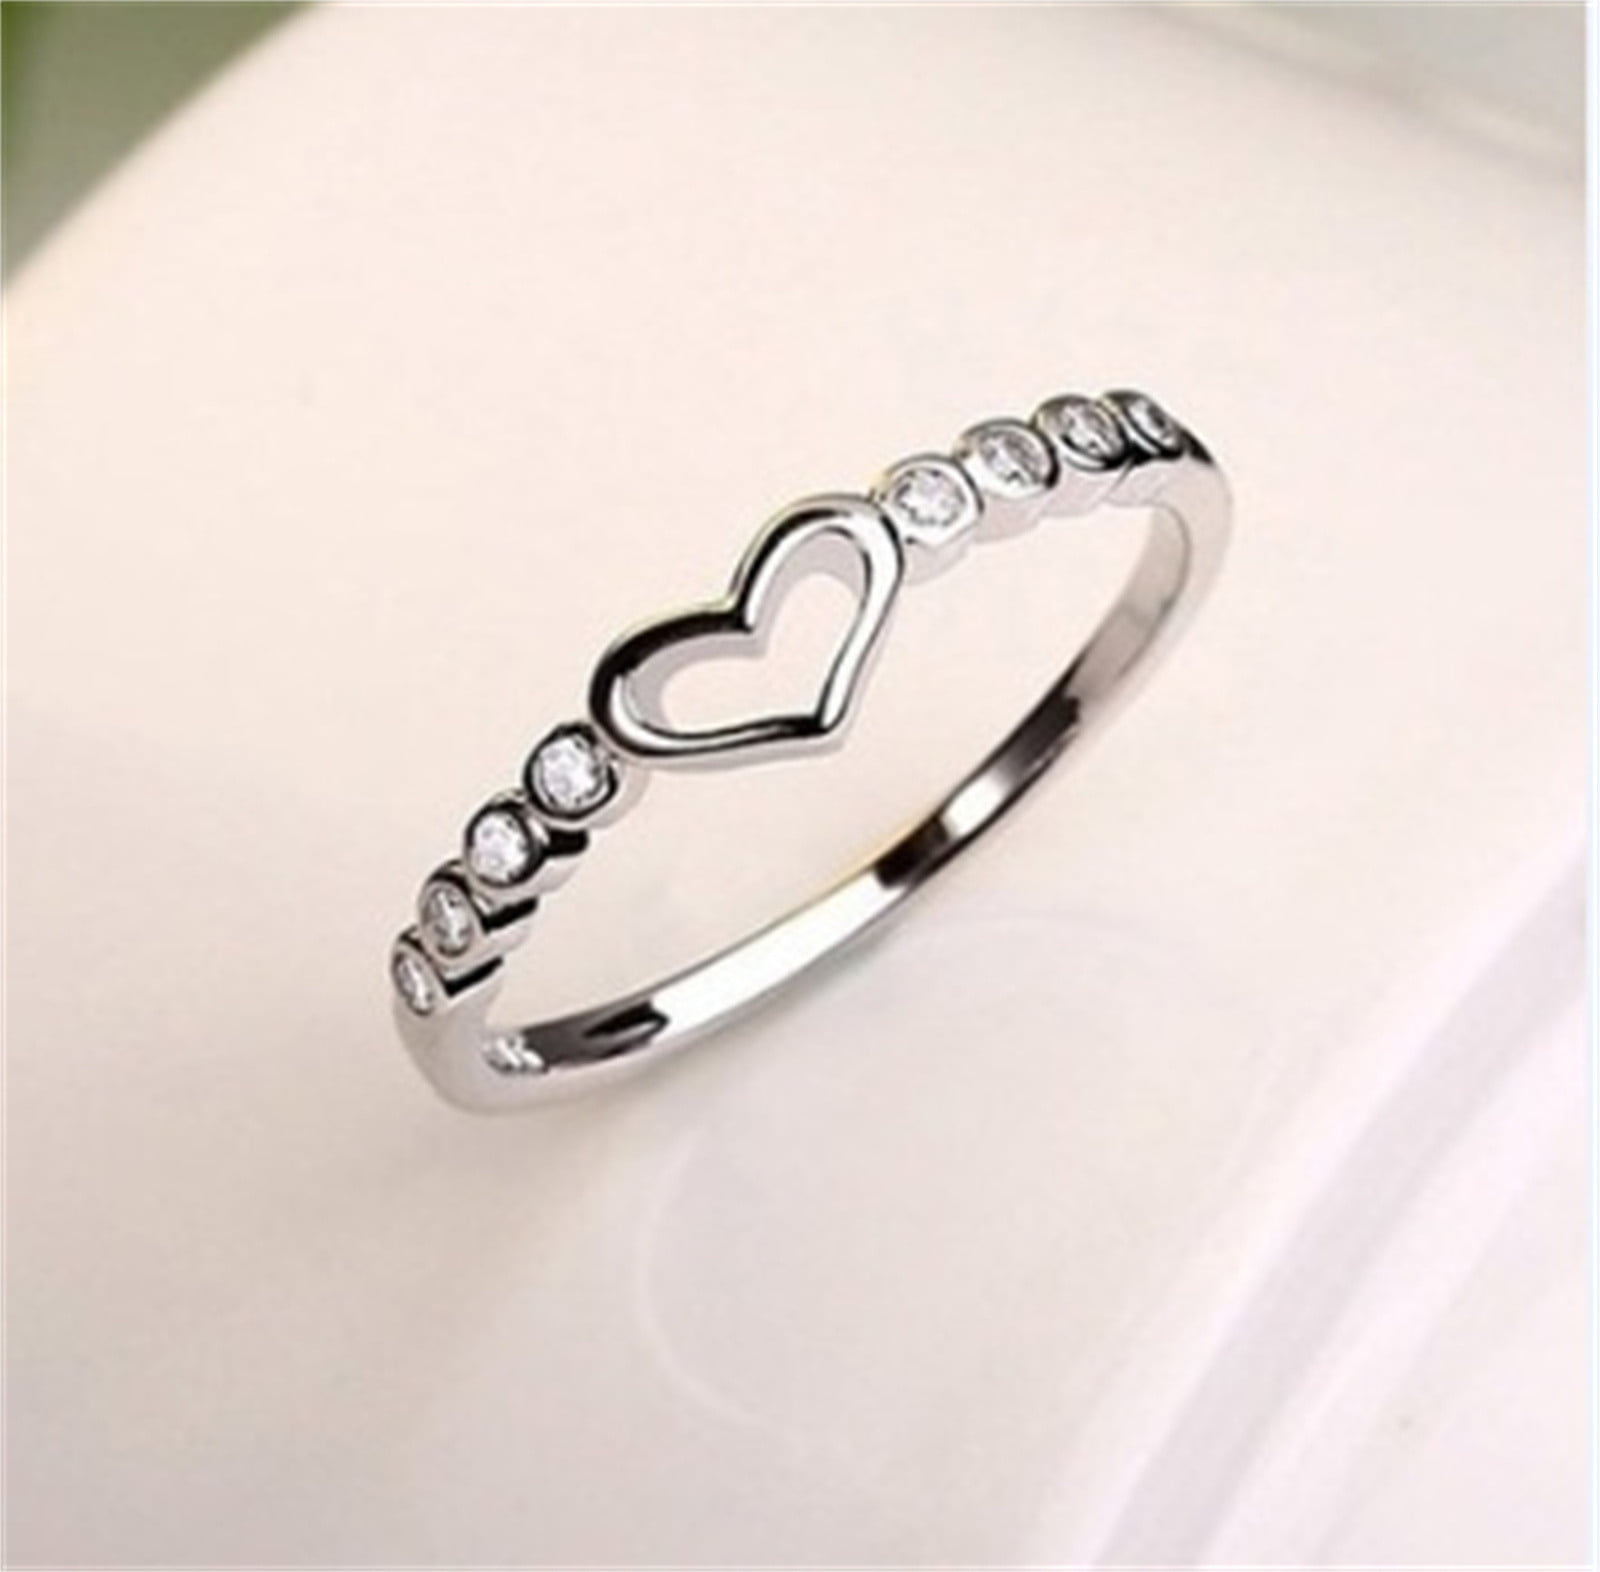 Up to 65% off! WEANT Womens 925 Sterling Silver Love Ring Jewelry Women ...